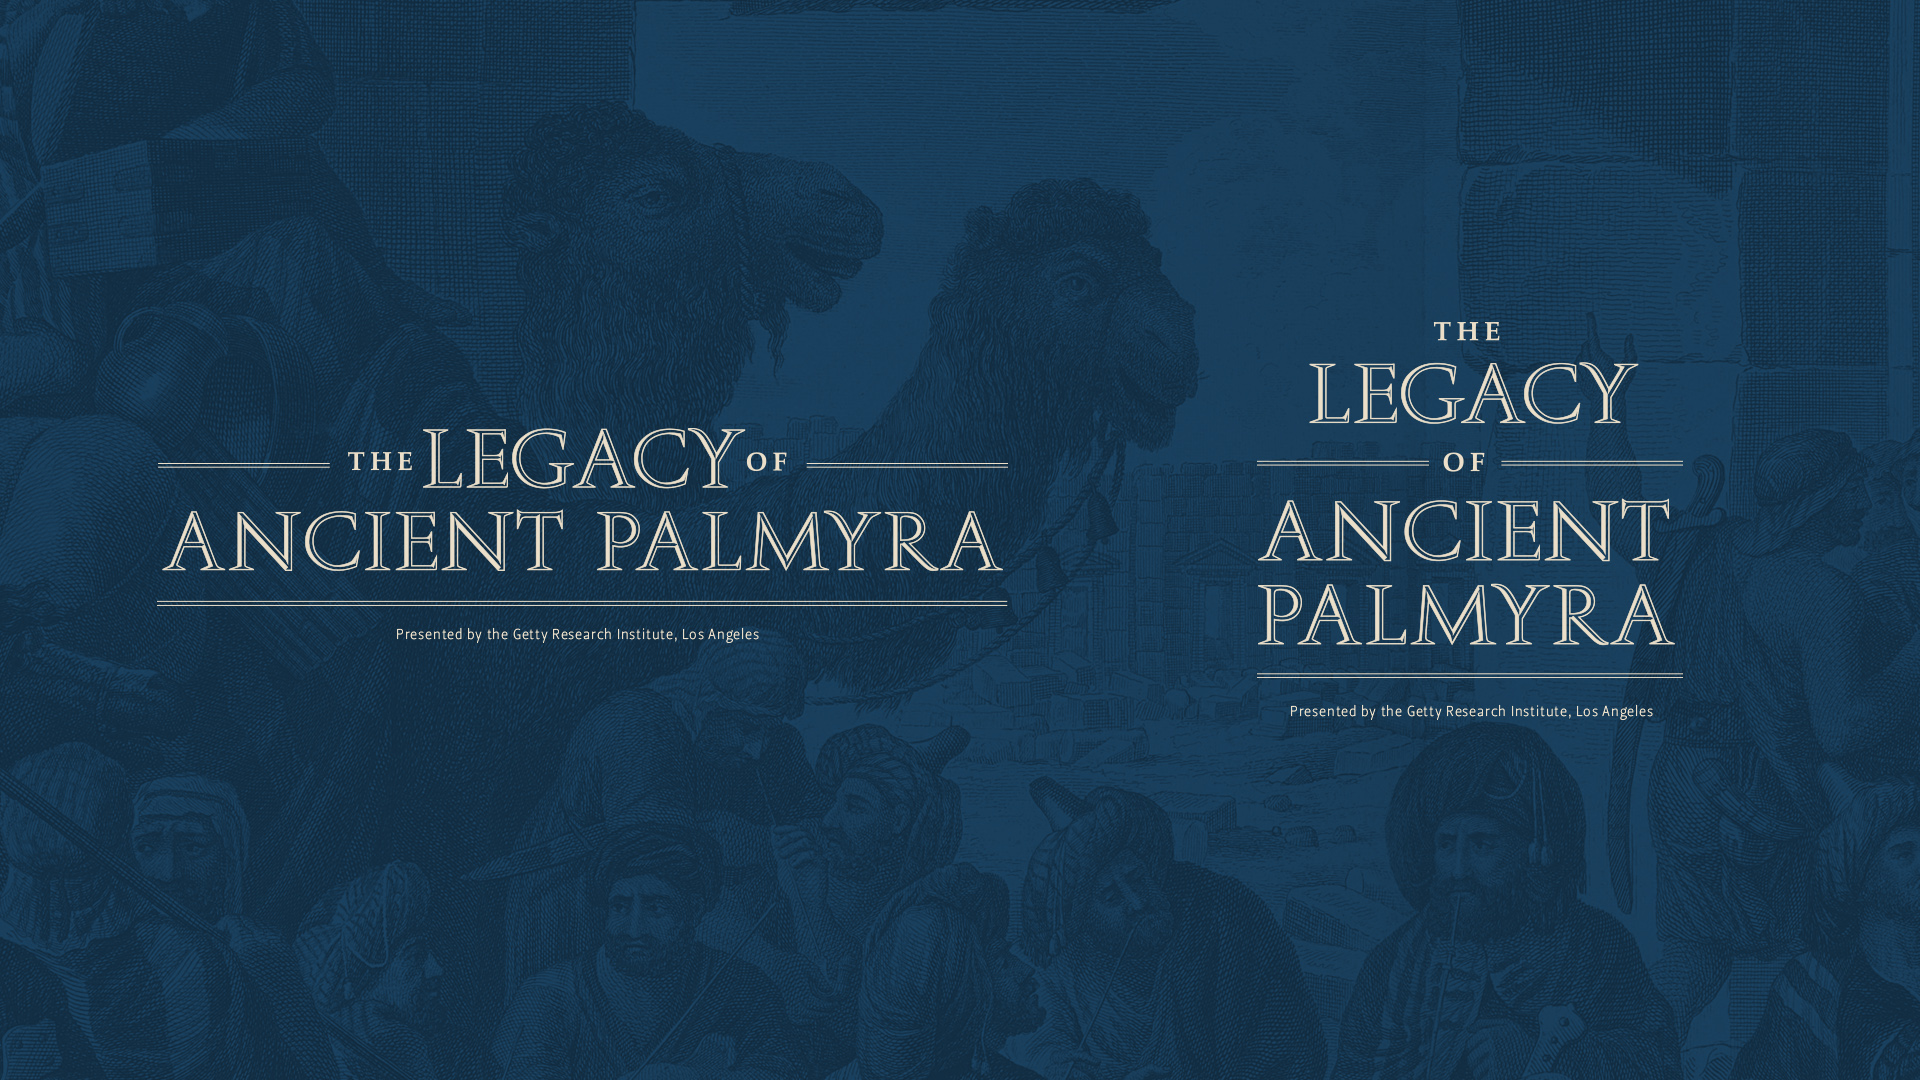 Exhibition Website & Identity: The Legacy of Ancient Palmyra